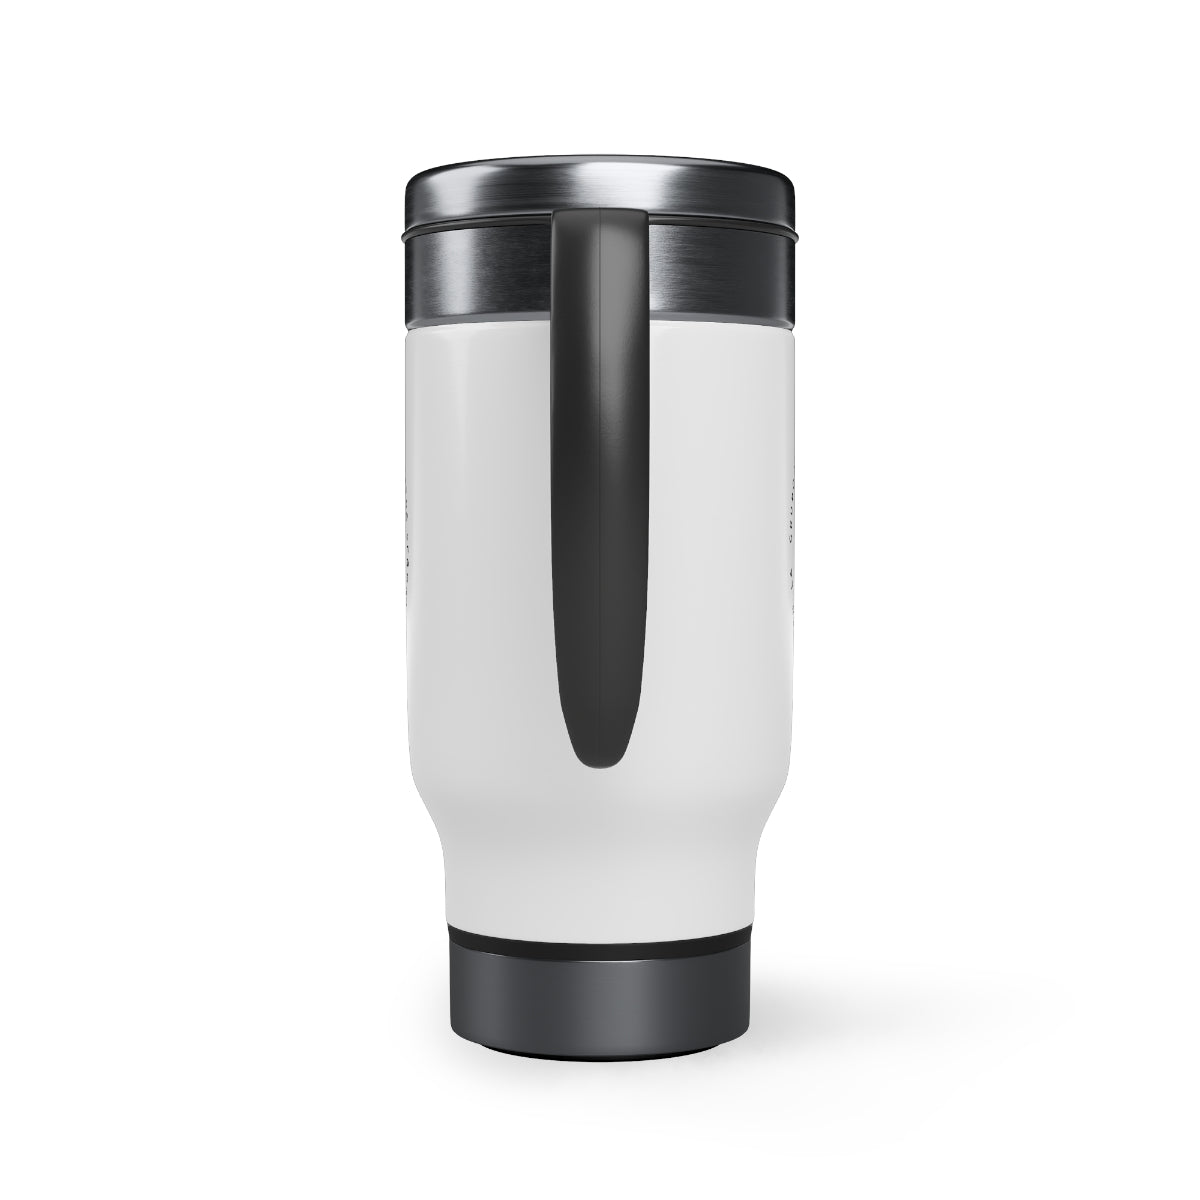 Lady of Victoria Stainless Steel Travel Mug with Handle, 14oz